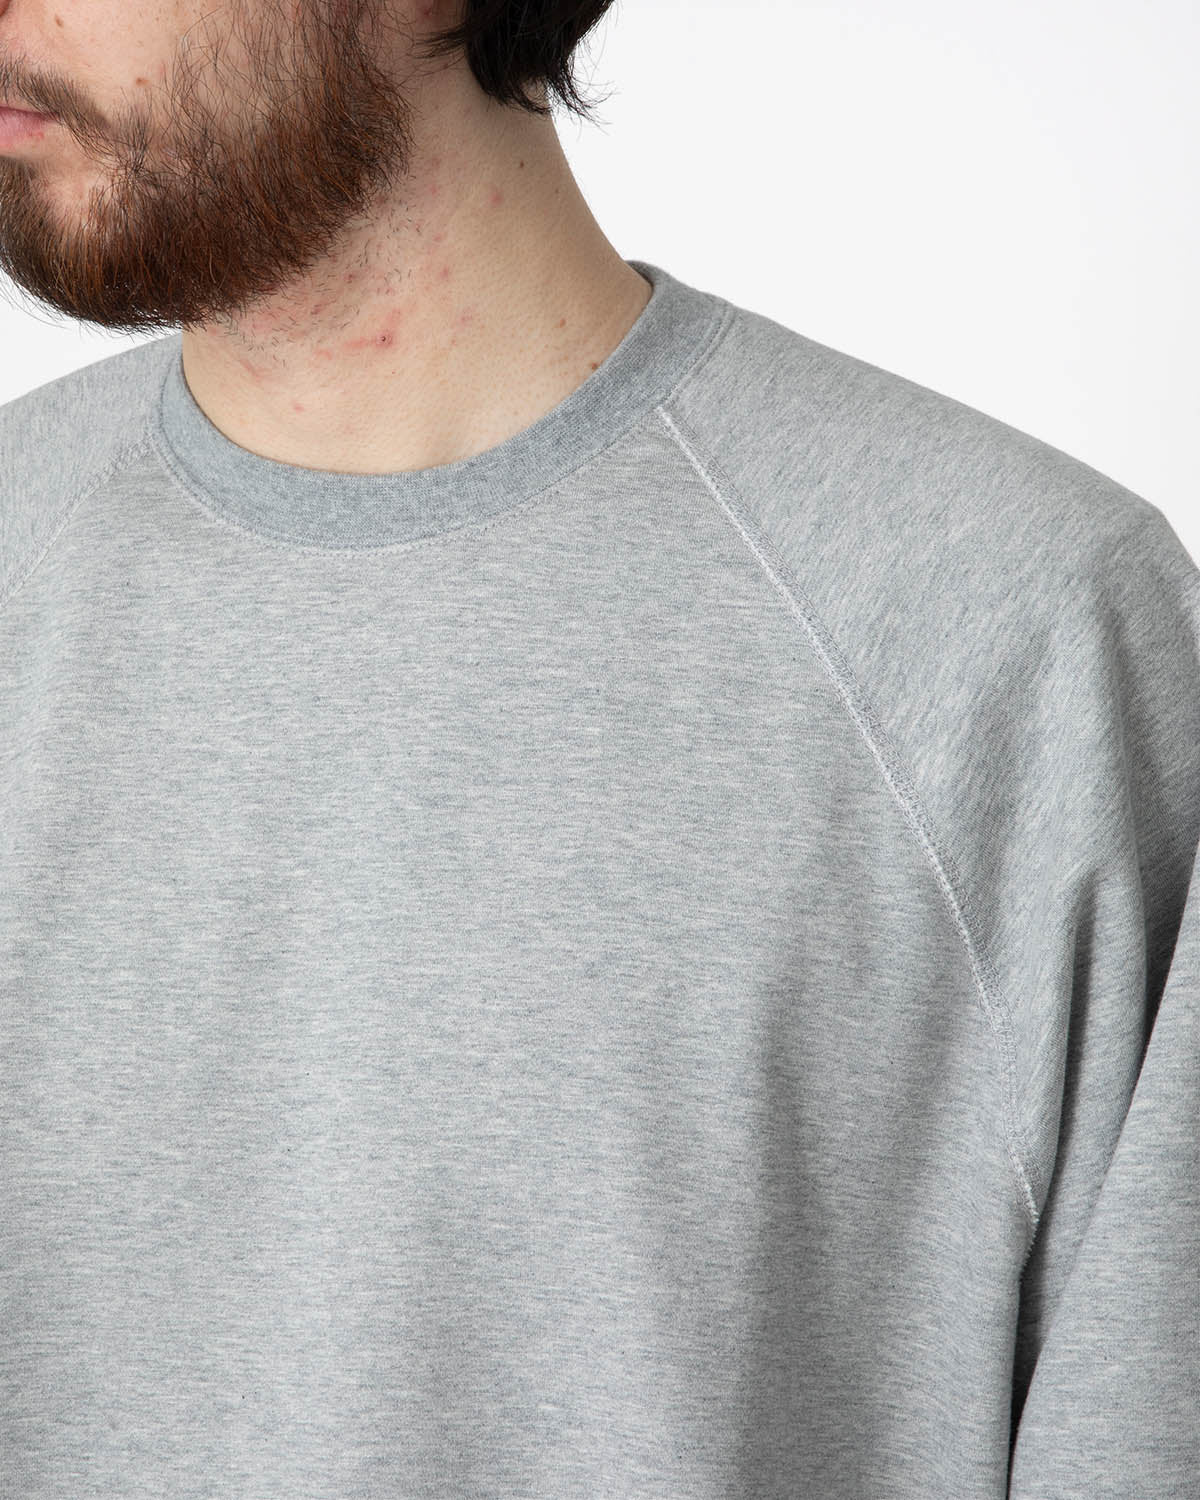 ULTRA COMPACT TERRY CREW NECK SWEATER